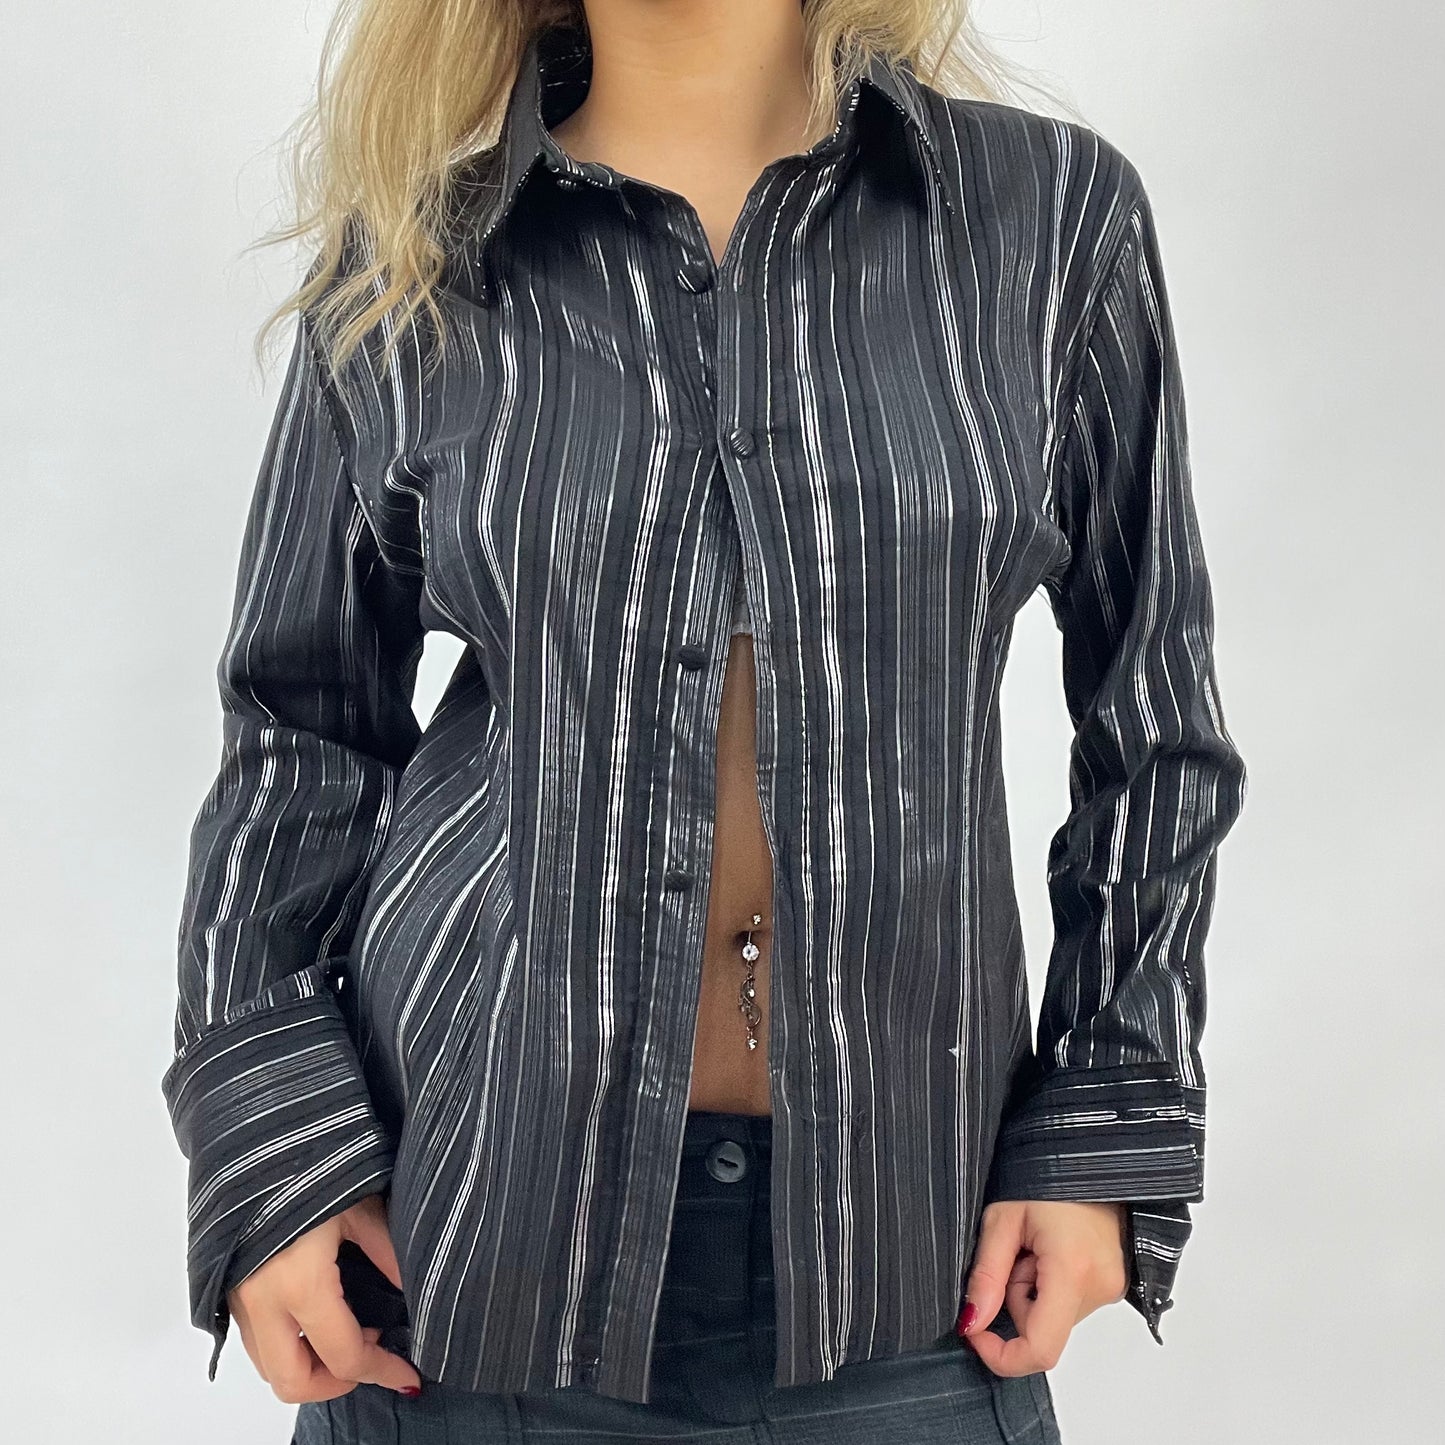 CORPCORE DROP | small black and silver pinstripe shirt